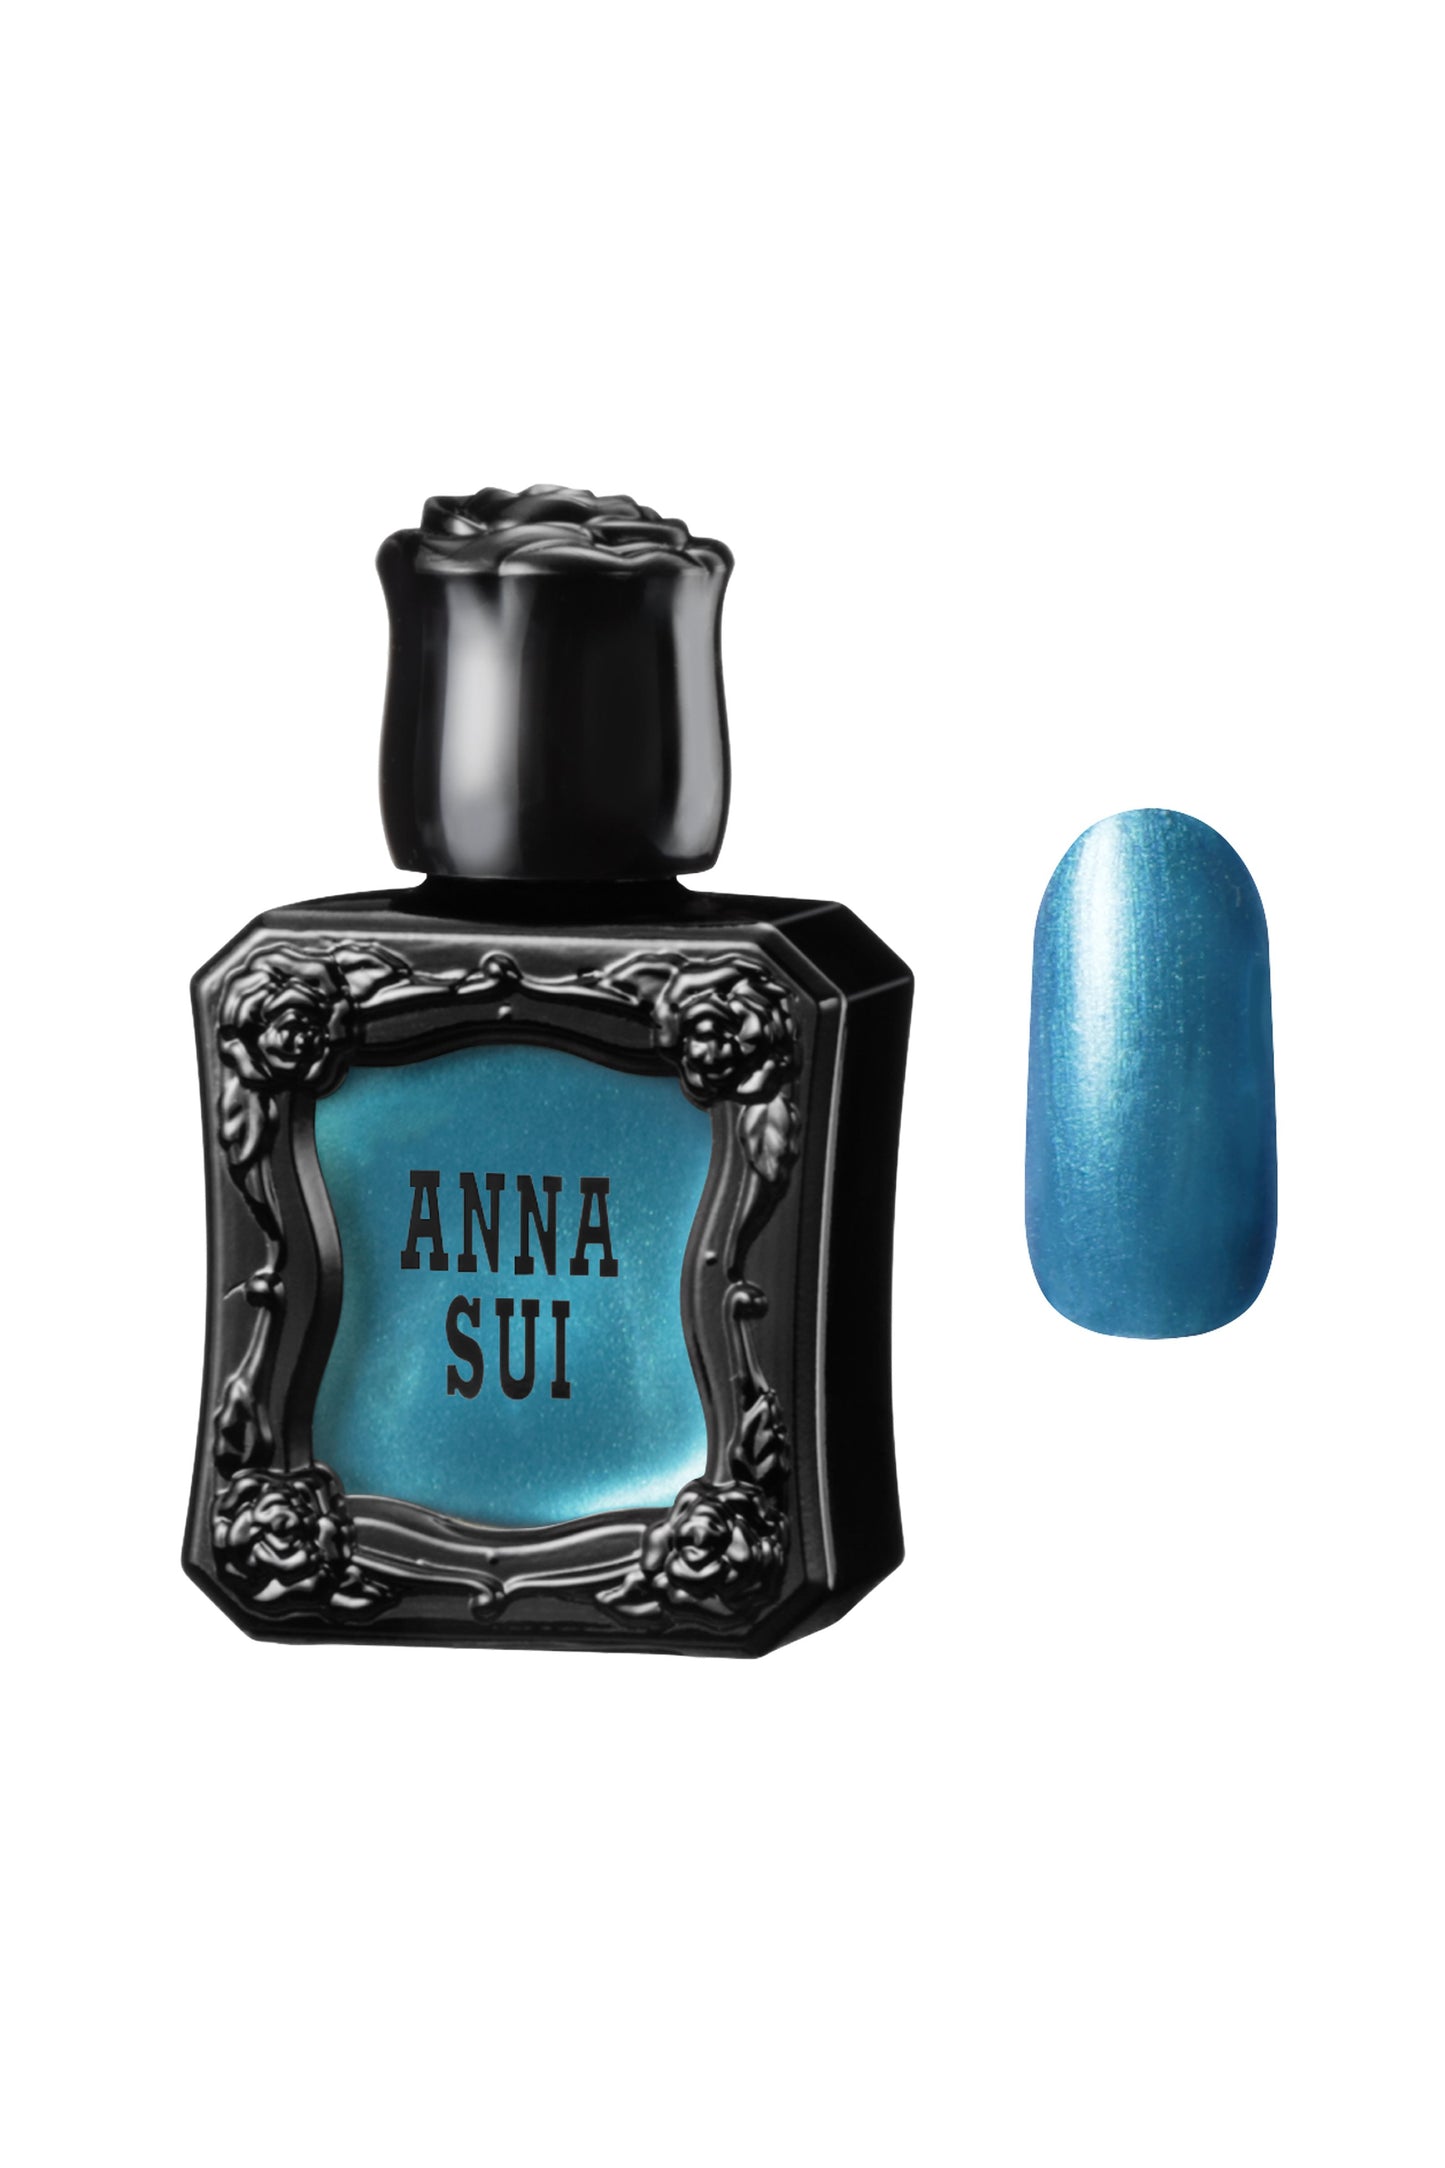 DEEP BLUE Nail Polish bottle raised rose pattern, Anna Sui in black over nail colors in bottle front